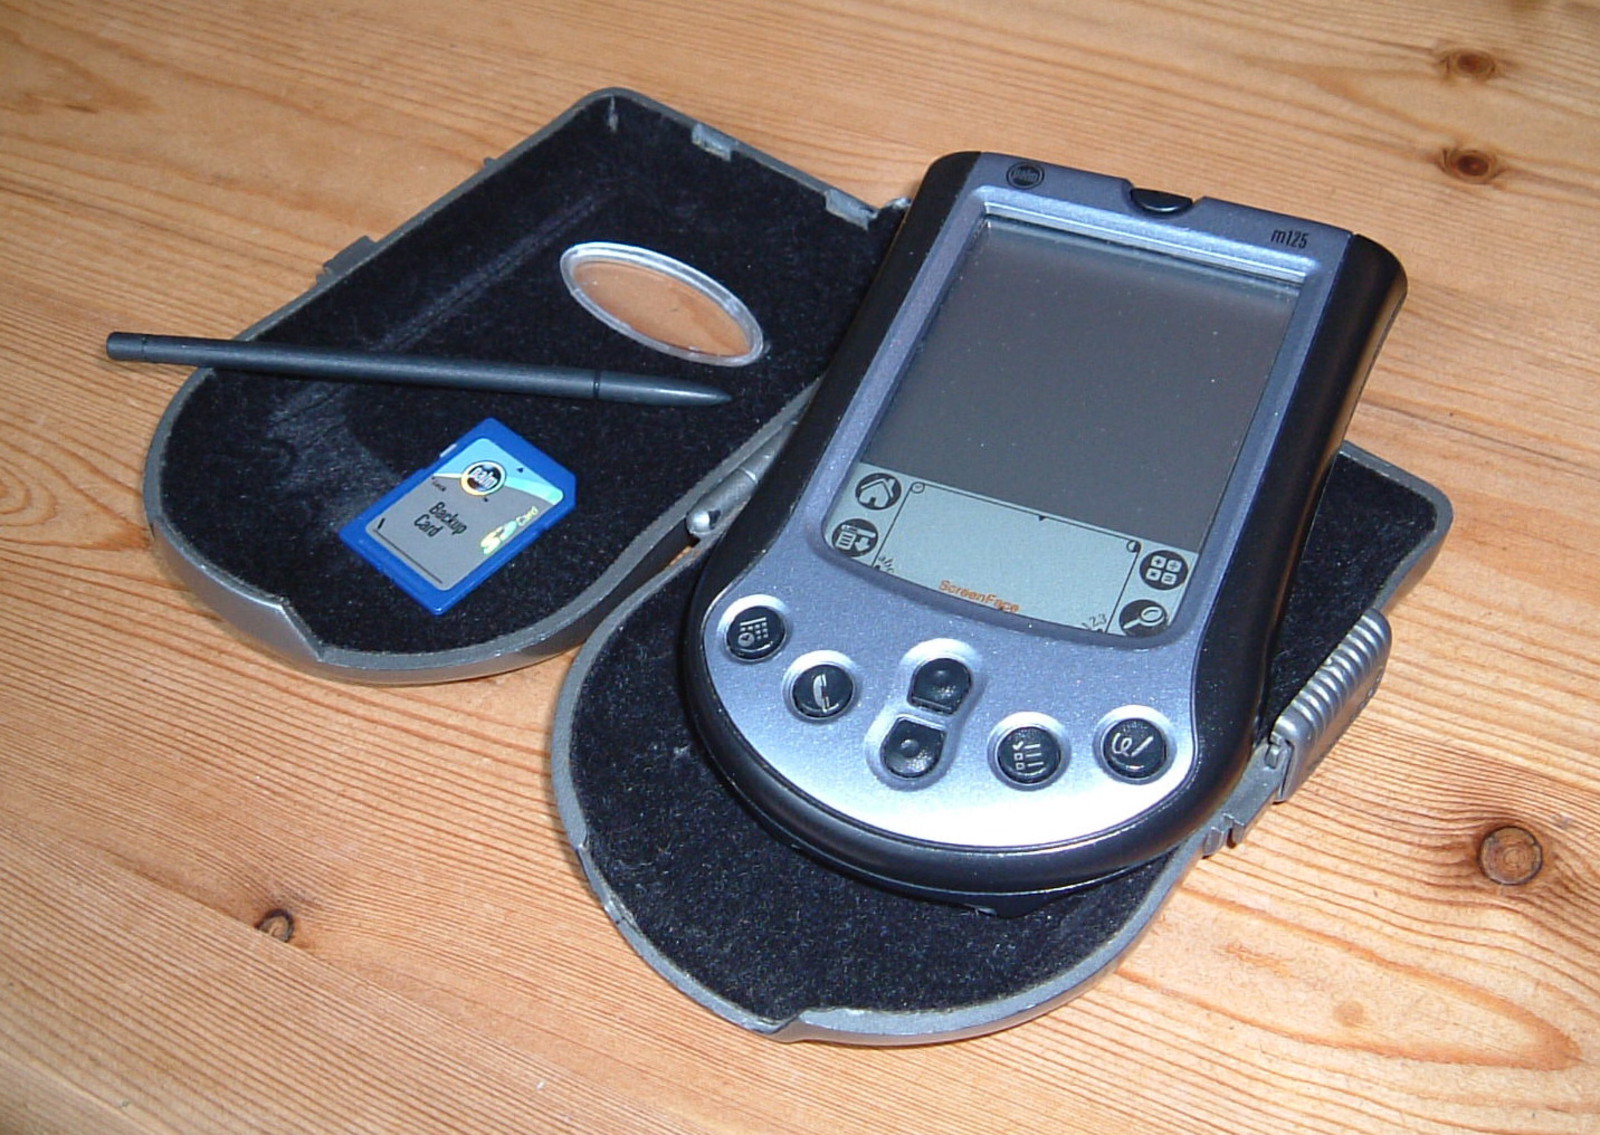 A Palm m125 and case